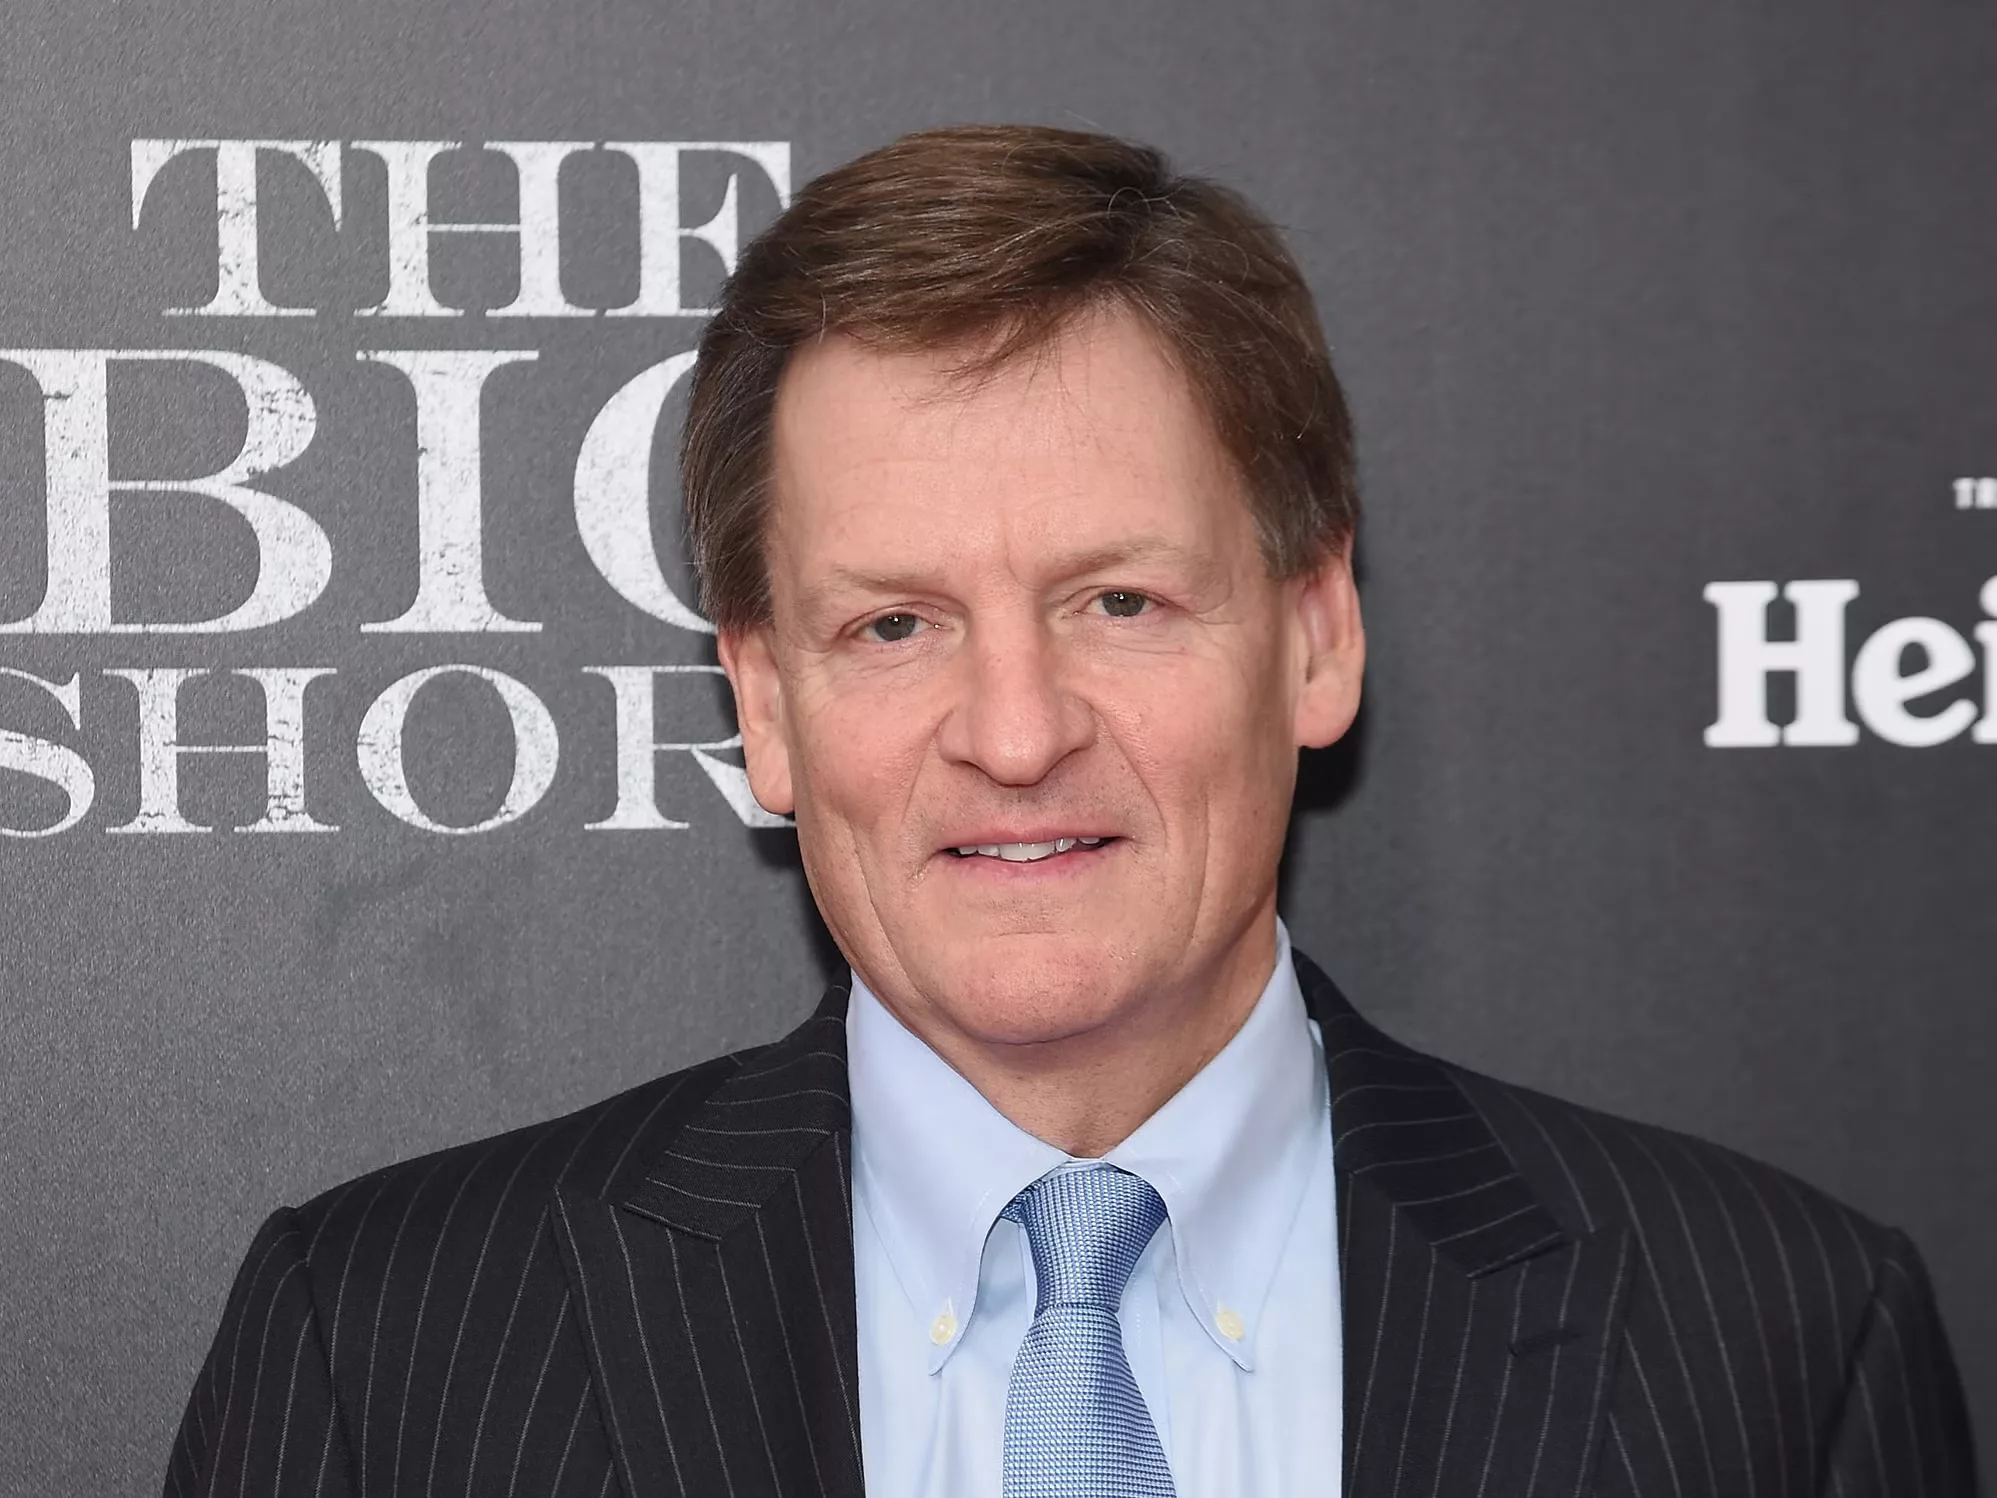 Don’t Eat Fortune’s Cookie: How Michael Lewis Got So Lucky